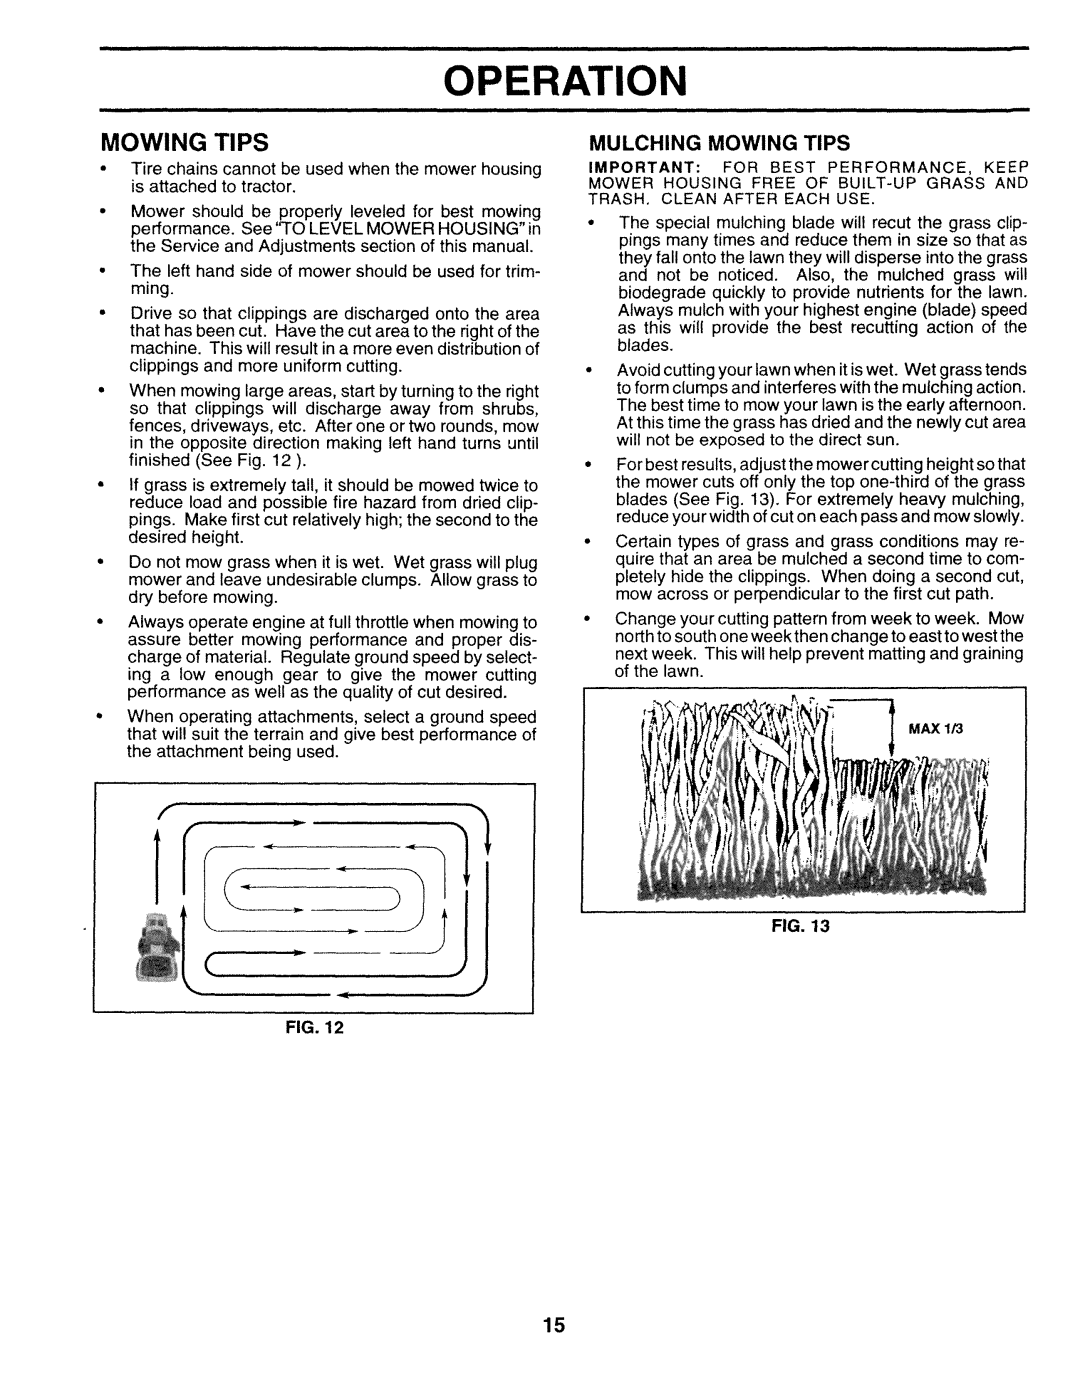 Sears 917.25271 owner manual Mulching Mowing Tips, Operation, Fig 